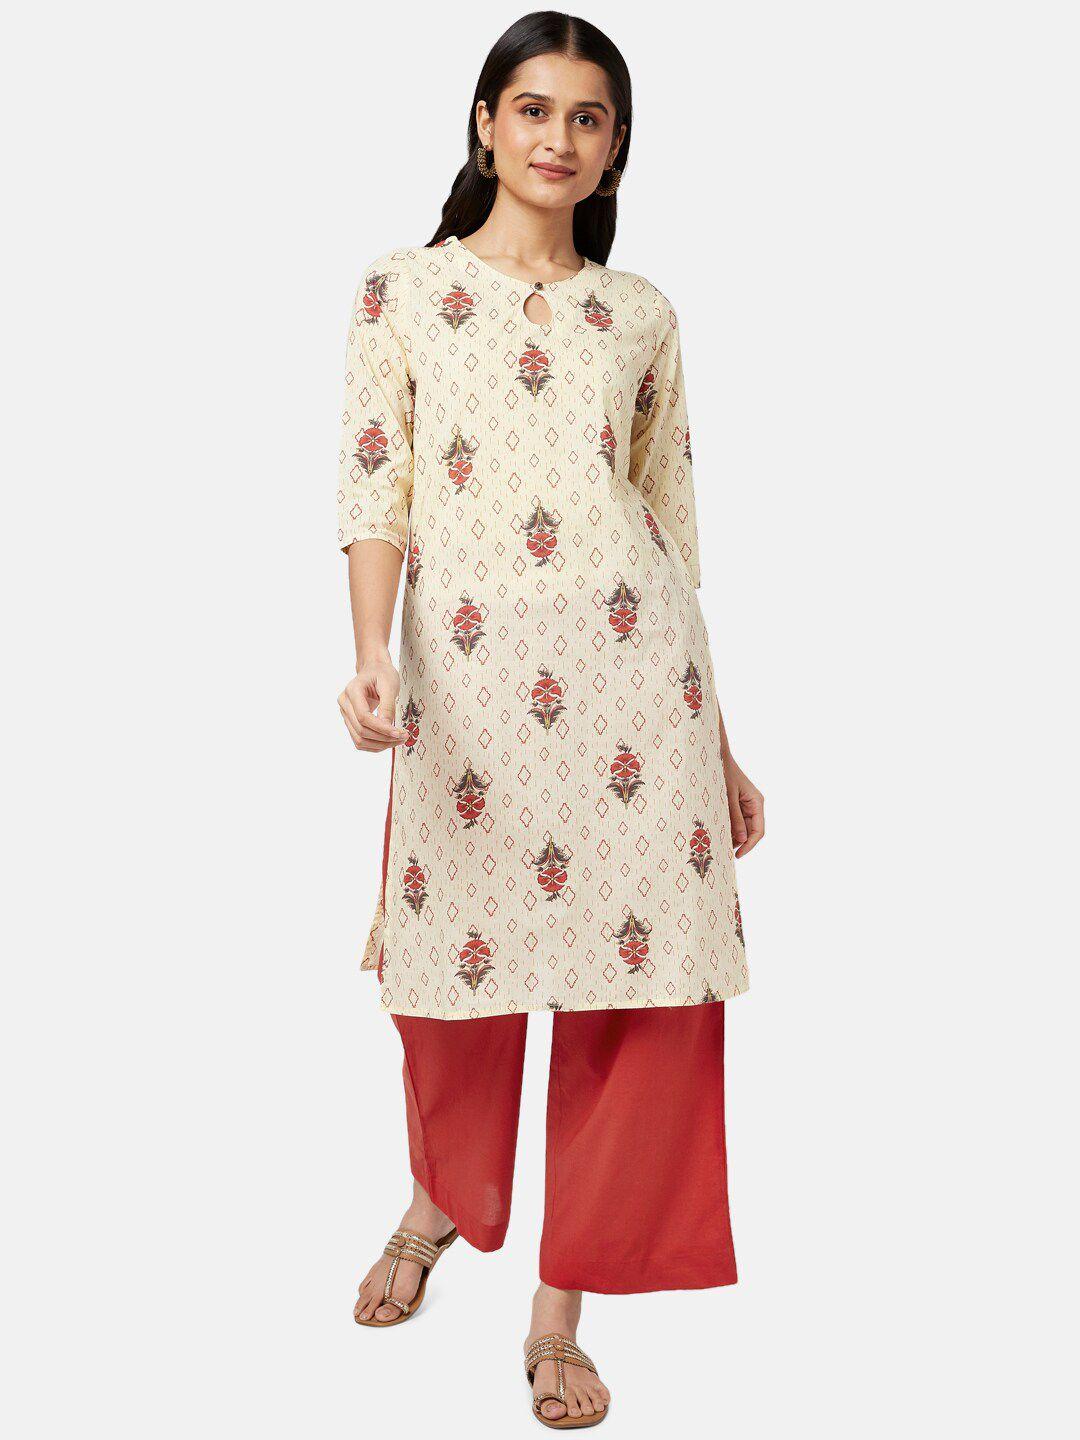 rangmanch by pantaloons women beige & red floral printed pure cotton kurta with trousers